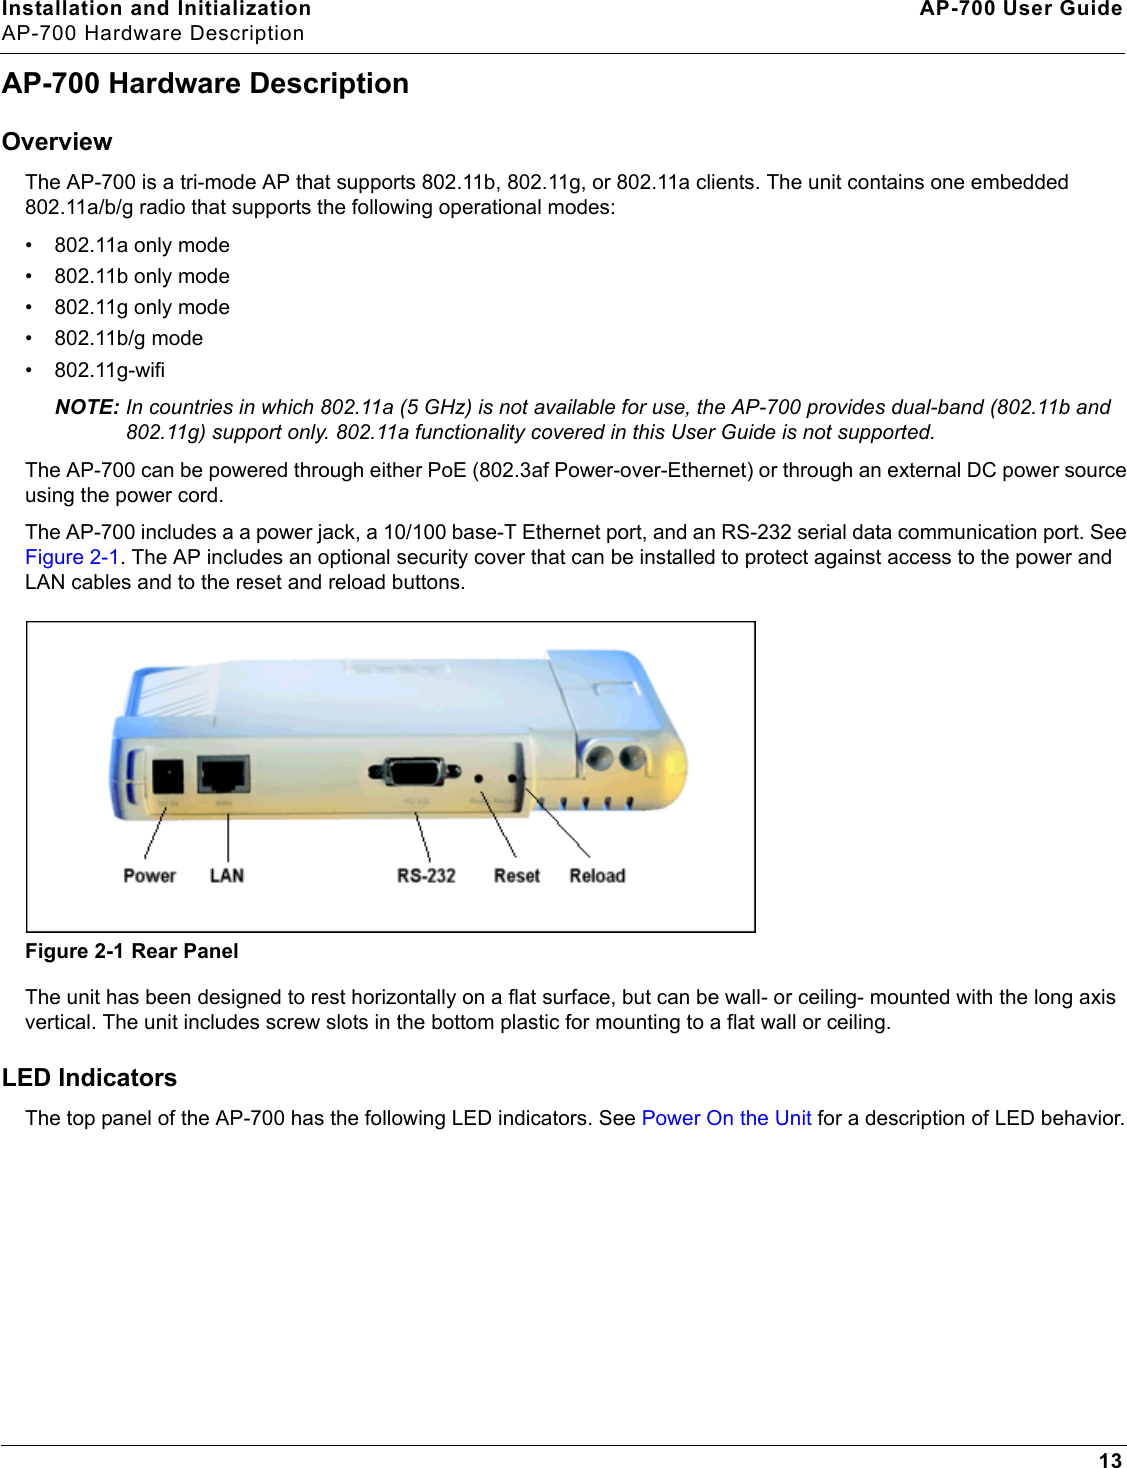 Installation and Initialization AP-700 User GuideAP-700 Hardware Description13AP-700 Hardware DescriptionOverviewThe AP-700 is a tri-mode AP that supports 802.11b, 802.11g, or 802.11a clients. The unit contains one embedded 802.11a/b/g radio that supports the following operational modes:• 802.11a only mode• 802.11b only mode• 802.11g only mode• 802.11b/g mode• 802.11g-wifiNOTE: In countries in which 802.11a (5 GHz) is not available for use, the AP-700 provides dual-band (802.11b and 802.11g) support only. 802.11a functionality covered in this User Guide is not supported. The AP-700 can be powered through either PoE (802.3af Power-over-Ethernet) or through an external DC power source using the power cord.The AP-700 includes a a power jack, a 10/100 base-T Ethernet port, and an RS-232 serial data communication port. See Figure 2-1. The AP includes an optional security cover that can be installed to protect against access to the power and LAN cables and to the reset and reload buttons. Figure 2-1 Rear PanelThe unit has been designed to rest horizontally on a flat surface, but can be wall- or ceiling- mounted with the long axis vertical. The unit includes screw slots in the bottom plastic for mounting to a flat wall or ceiling.LED IndicatorsThe top panel of the AP-700 has the following LED indicators. See Power On the Unit for a description of LED behavior.